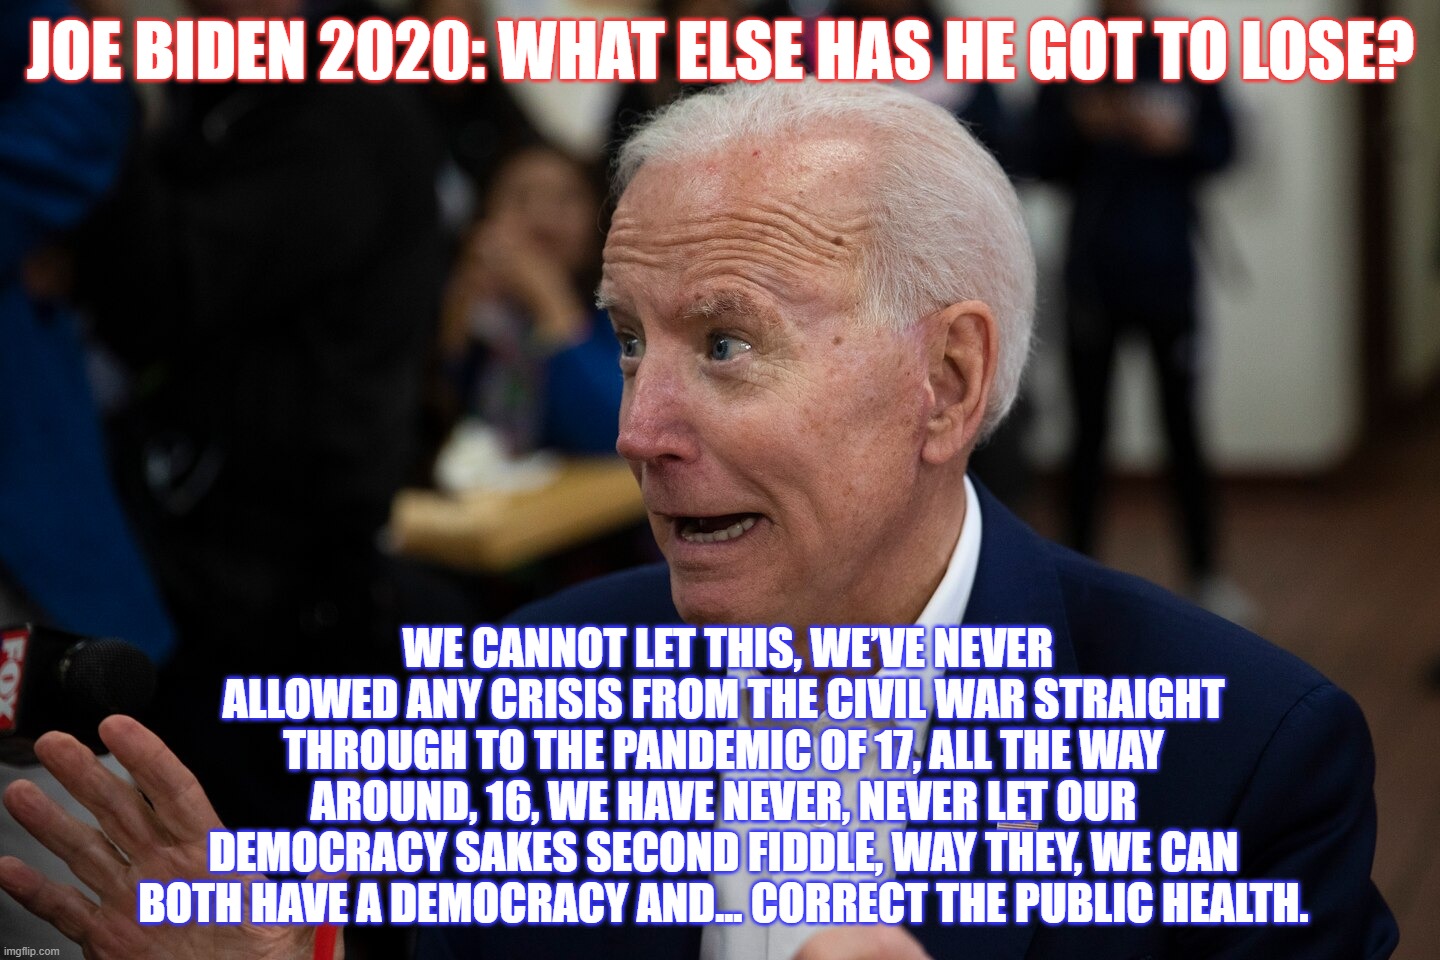 Old Uncle Quid Pro Joe should be ready to sail into the sunset and enjoy retirement.  Instead, he's the best the Dems have??? | JOE BIDEN 2020: WHAT ELSE HAS HE GOT TO LOSE? WE CANNOT LET THIS, WE’VE NEVER ALLOWED ANY CRISIS FROM THE CIVIL WAR STRAIGHT THROUGH TO THE PANDEMIC OF 17, ALL THE WAY AROUND, 16, WE HAVE NEVER, NEVER LET OUR DEMOCRACY SAKES SECOND FIDDLE, WAY THEY, WE CAN BOTH HAVE A DEMOCRACY AND... CORRECT THE PUBLIC HEALTH. | image tagged in biden dementia,trump 2020,his veep will be young,he will sniff his veep | made w/ Imgflip meme maker